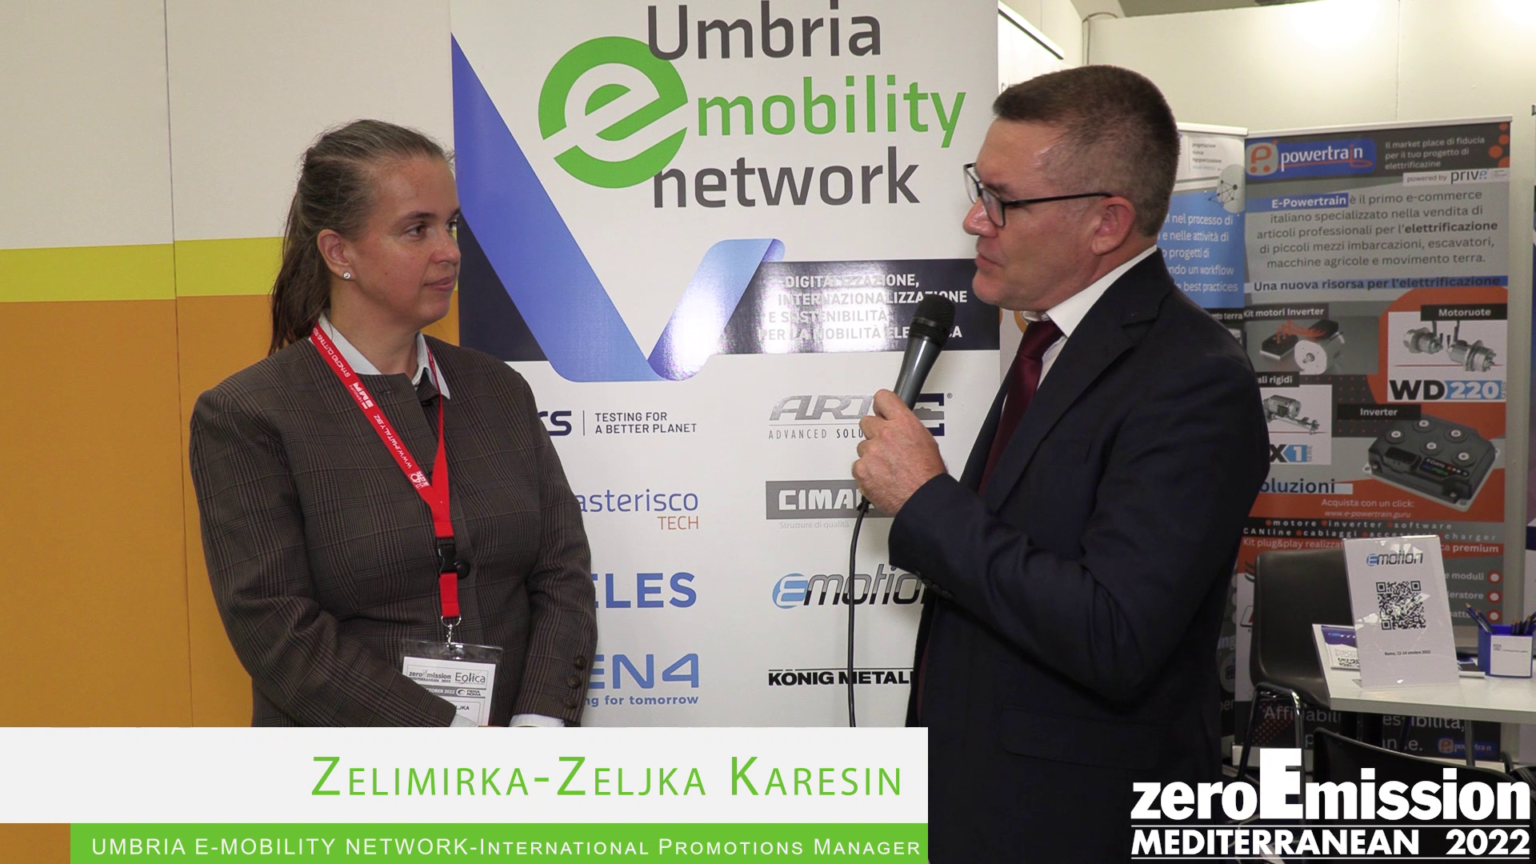 ZEROEMISSION 2022 – UMBRIA E-MOBILITY NETWORK – Interview – Official Video